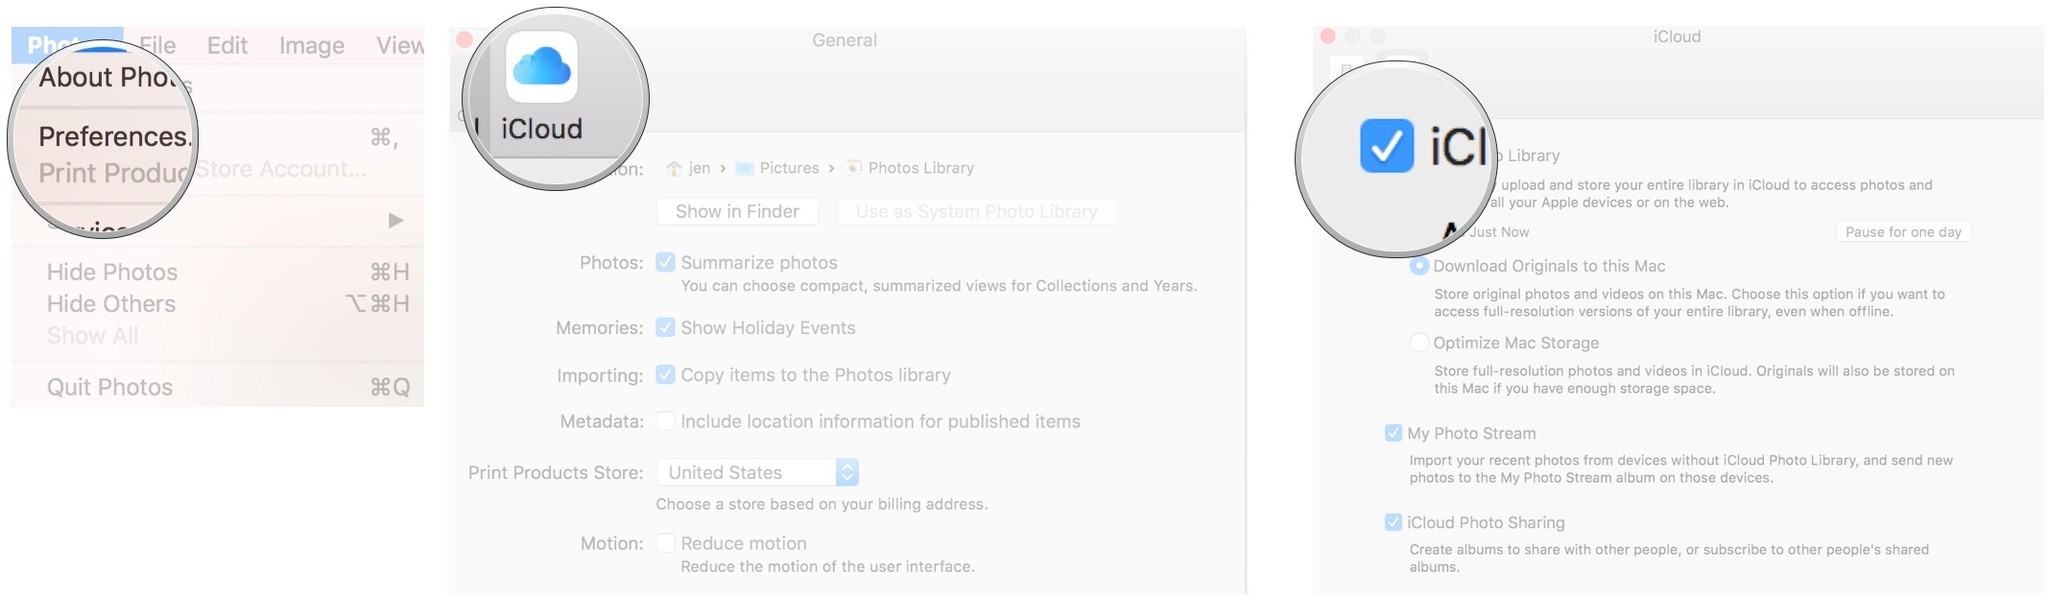 Select preferences from the drop down menu, Click on the iCloud tab, tick the box to enable iCloud Photo Library.